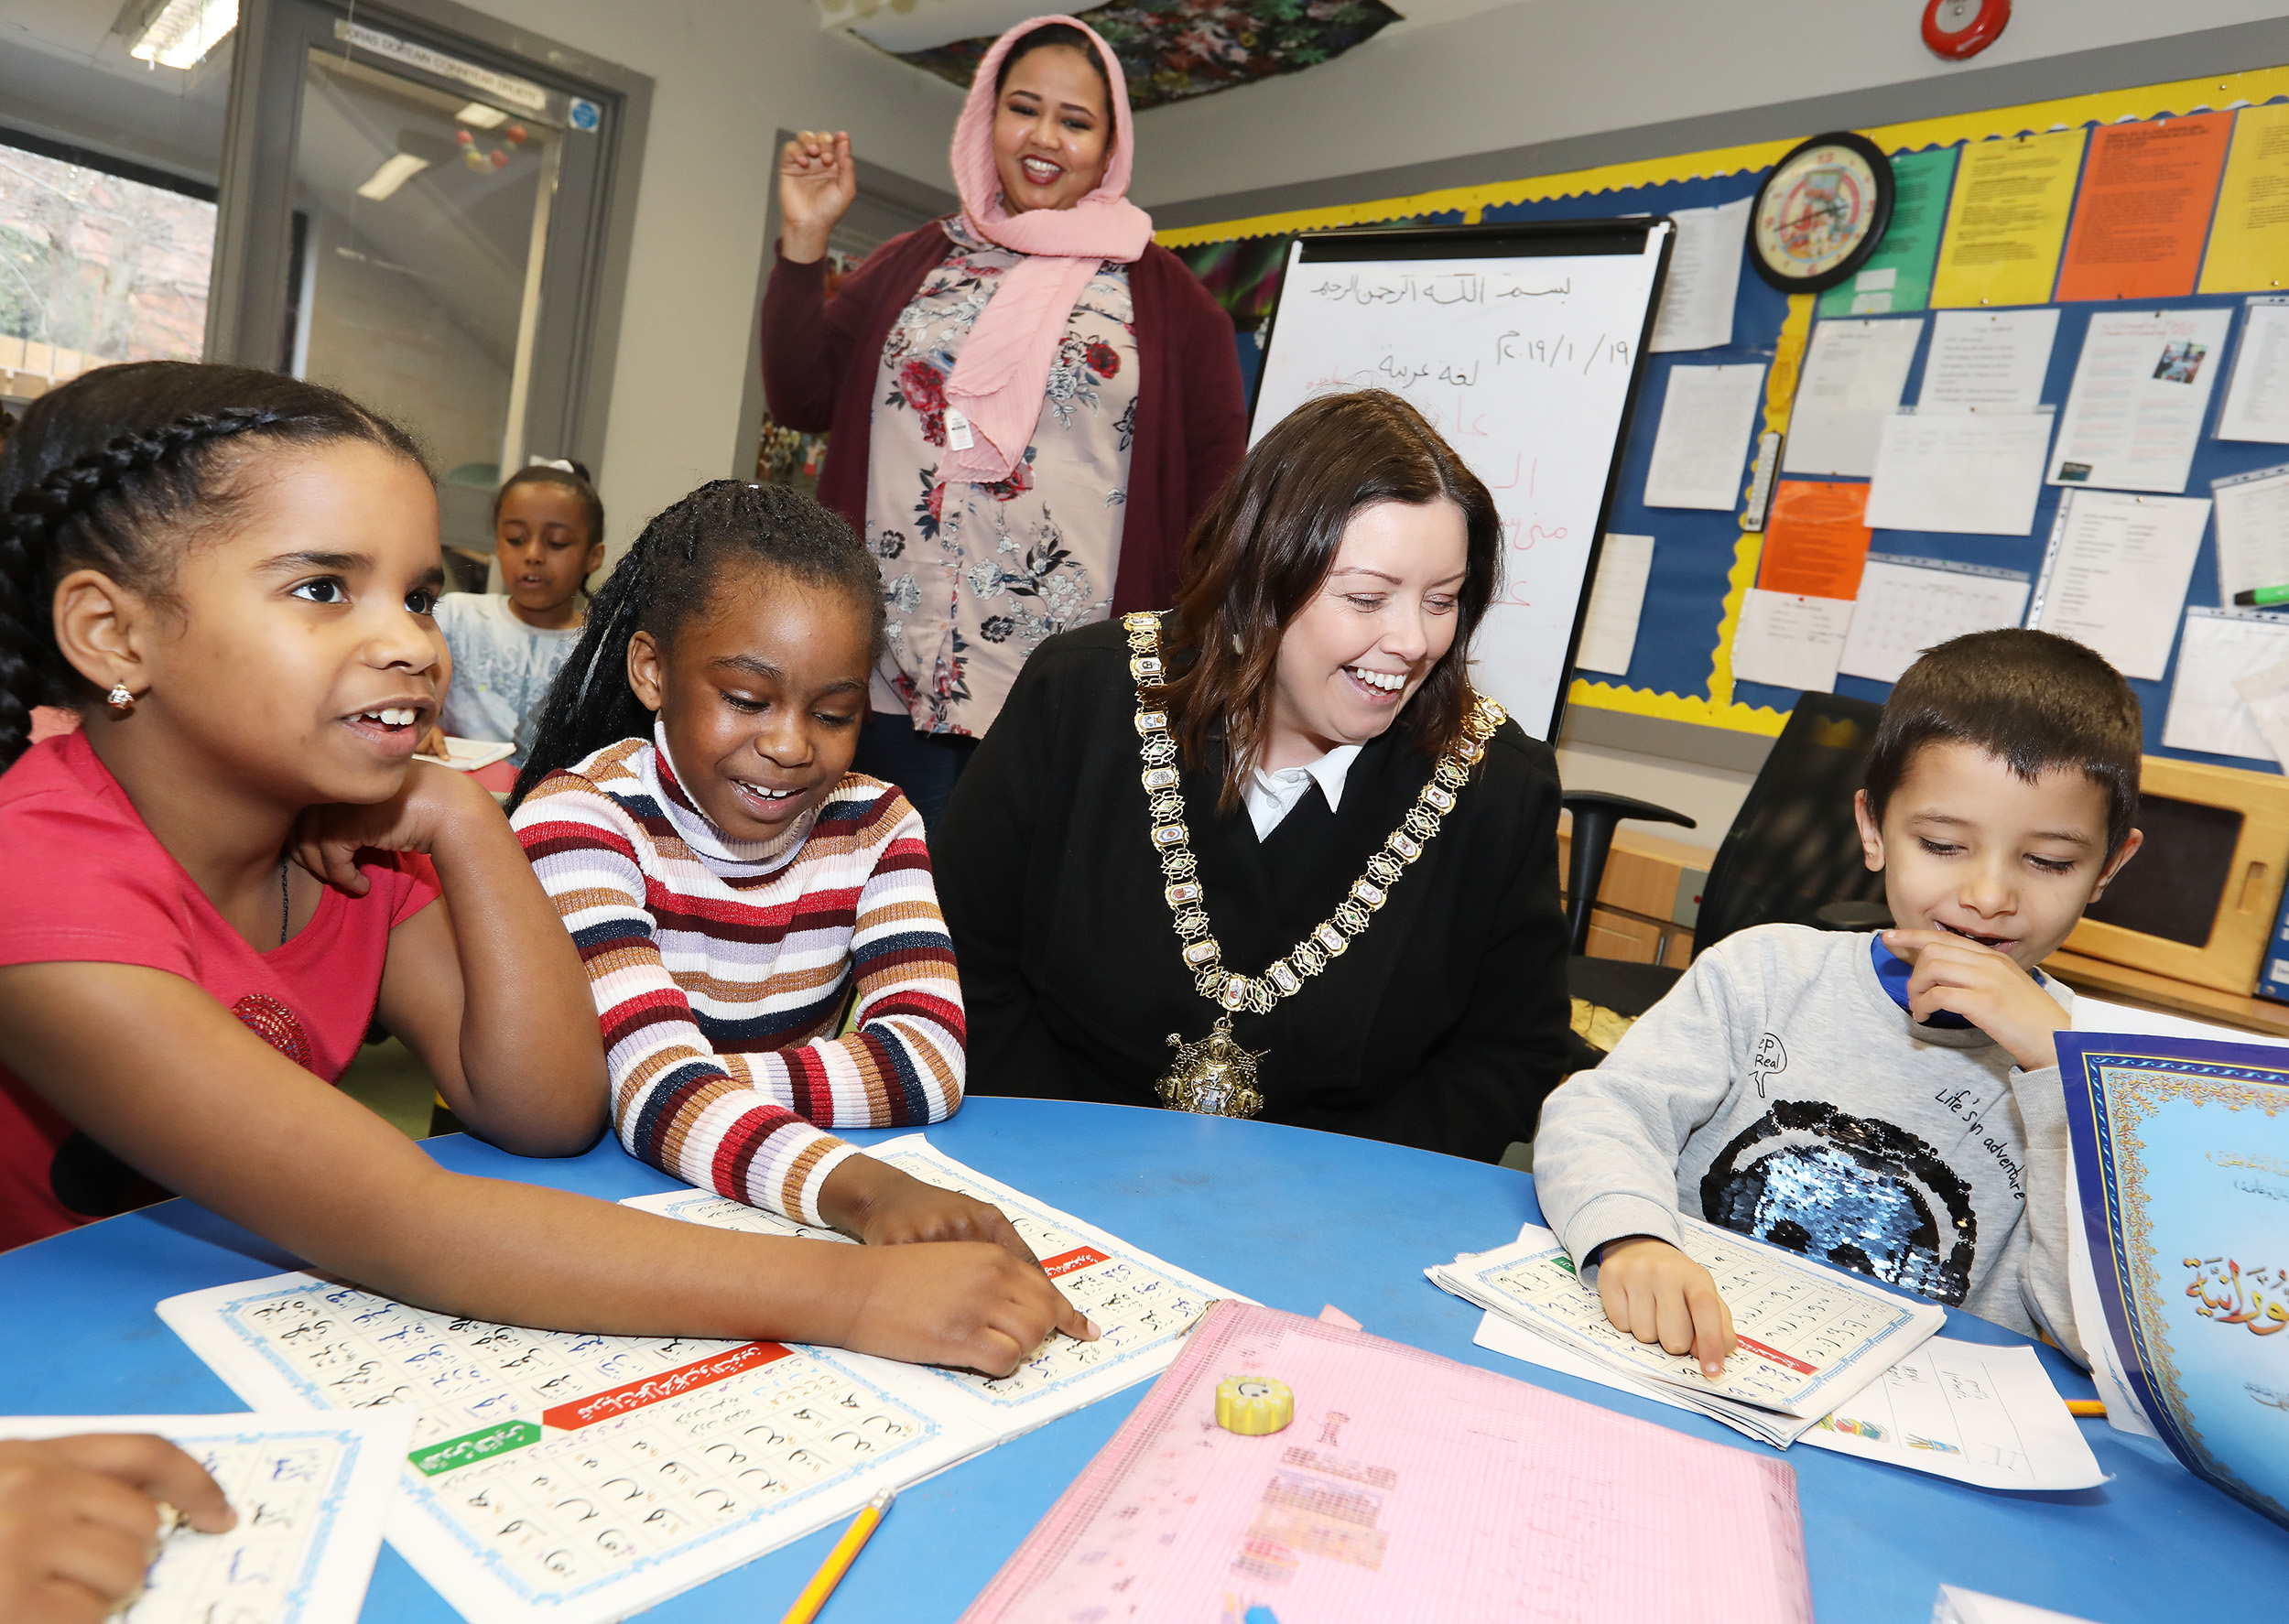 Lord Mayor Deirdre Hargey joins a class at the An Droichead, Sudanese Saturday School with students Mona, Sireen and Ali Saad, and teacher Mohga Salih 